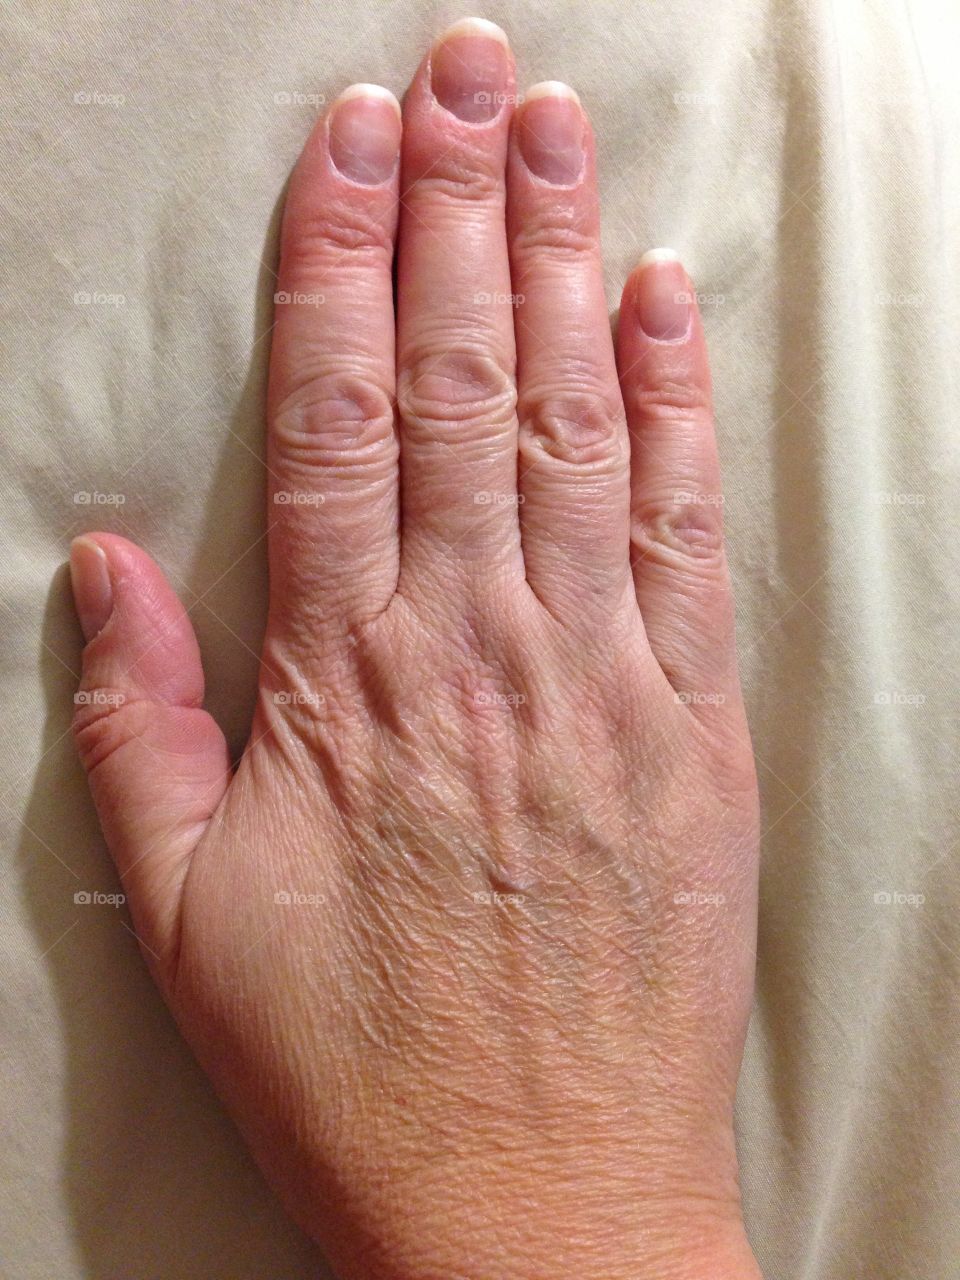 This is the right hand of a 44 year old right-handed Caucasian female.